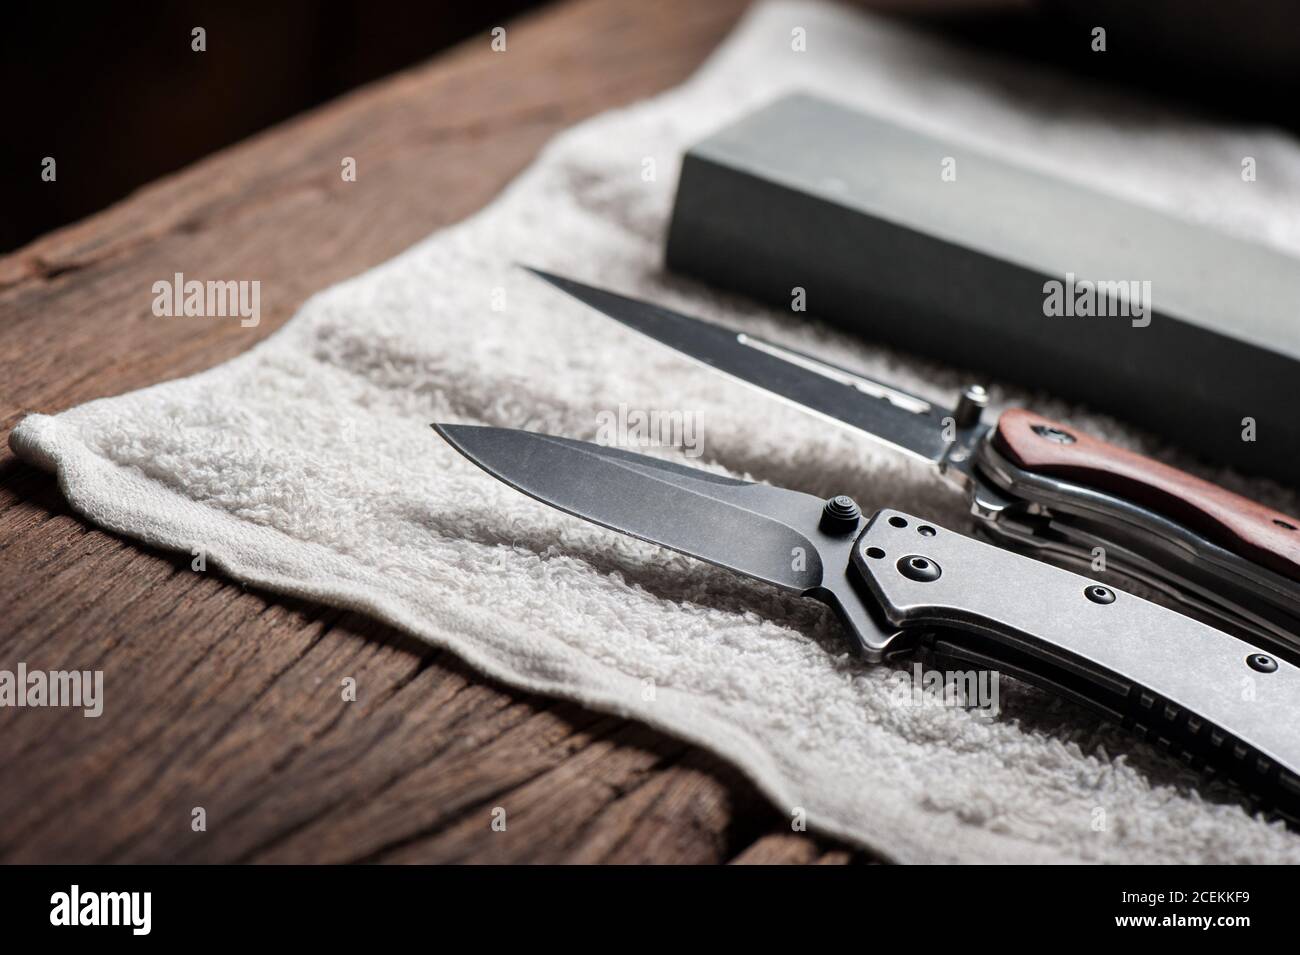 How To Sharpen a Folding Knife 